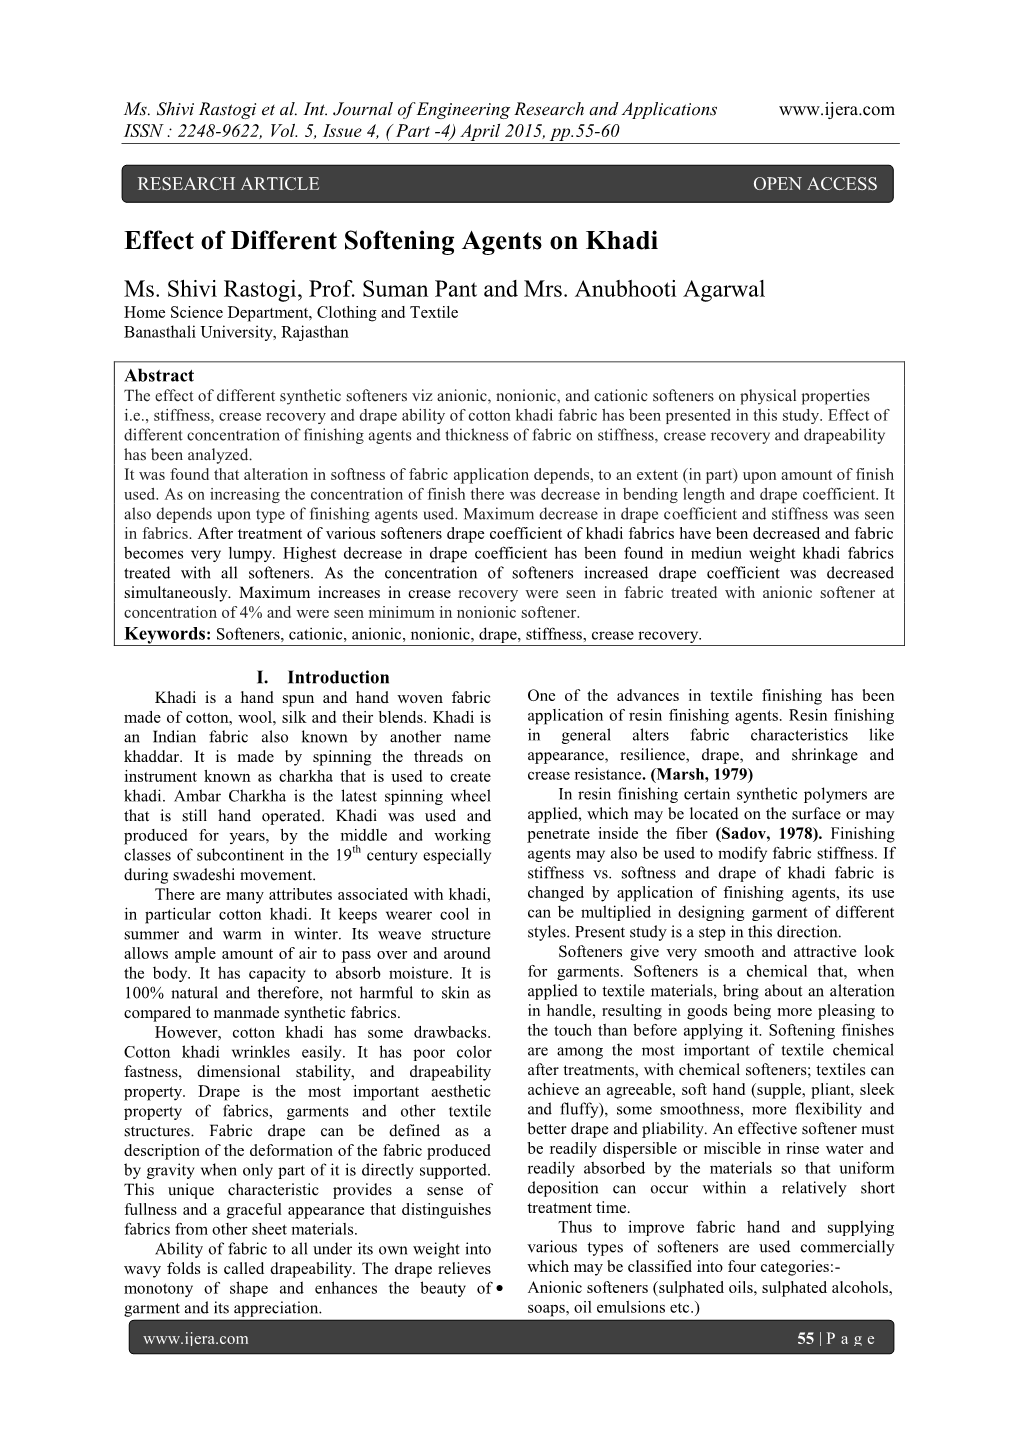 Effect of Different Softening Agents on Khadi